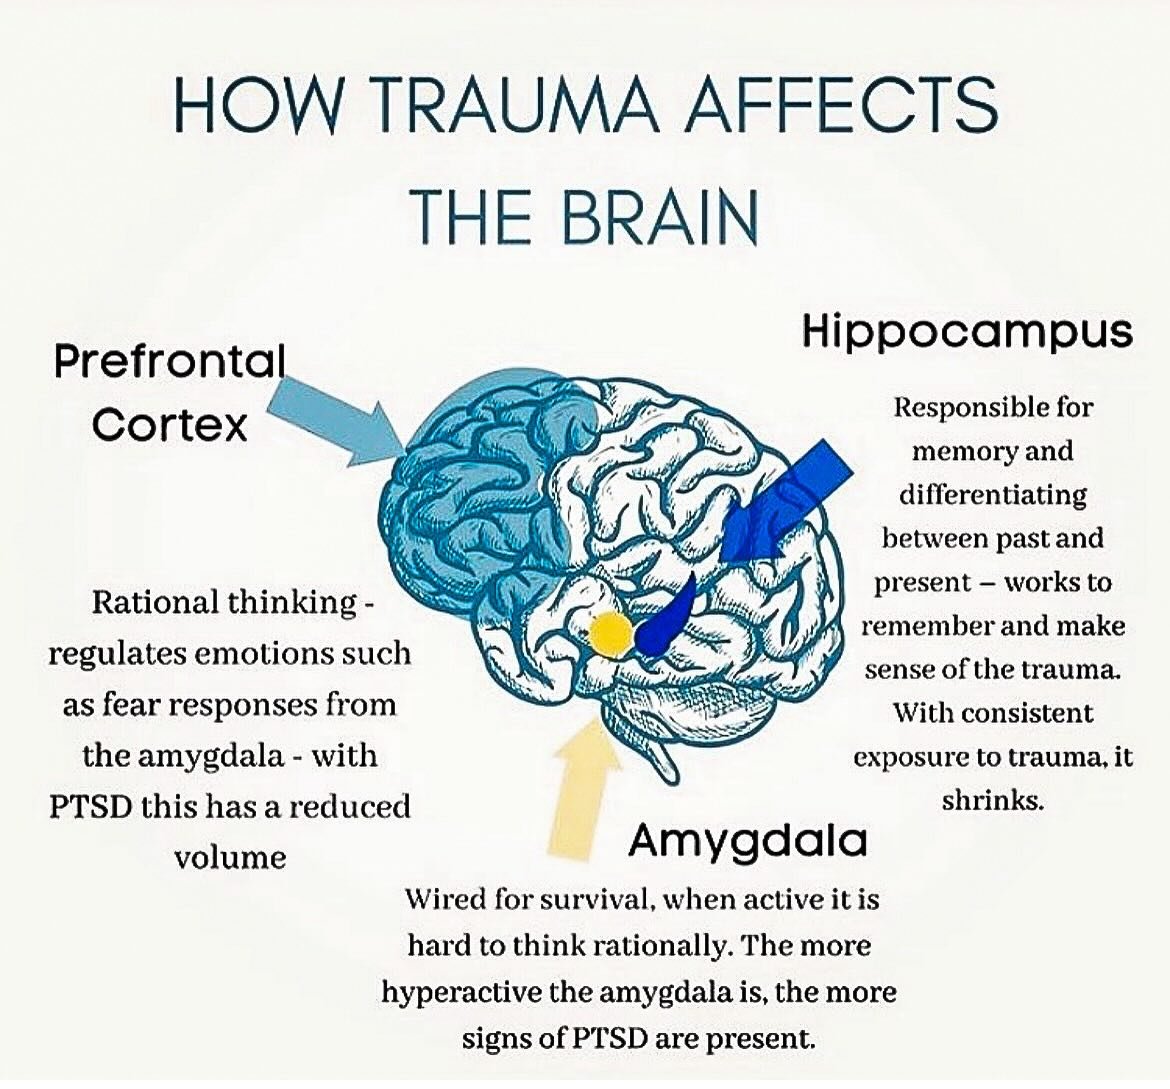 Trauma can leave deep imprints on the brain, but here&rsquo;s the good news: our brains have an incredible ability to heal and adapt through neuroplasticity. With the right support and tools, we can reshape our neural pathways, rewrite our stories, a